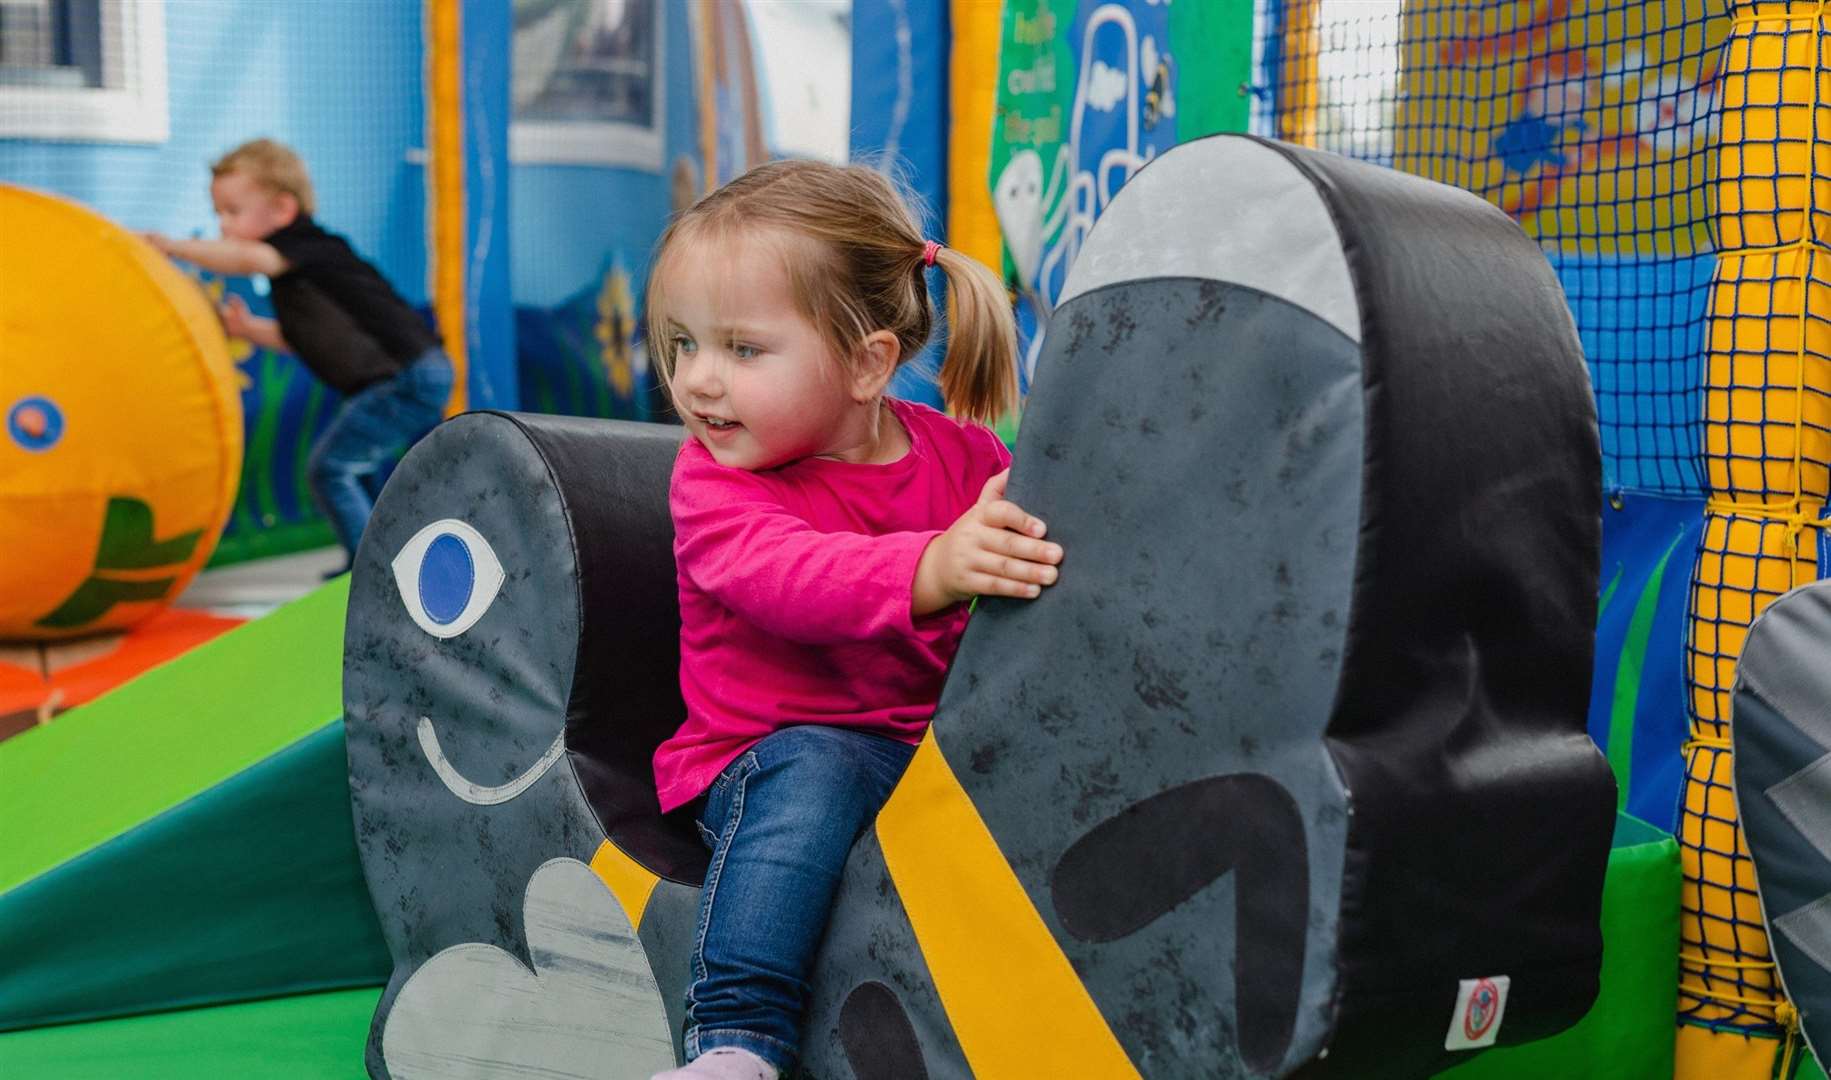 Dobbies is to reopen its soft play attractions in Ashford and Gillingham